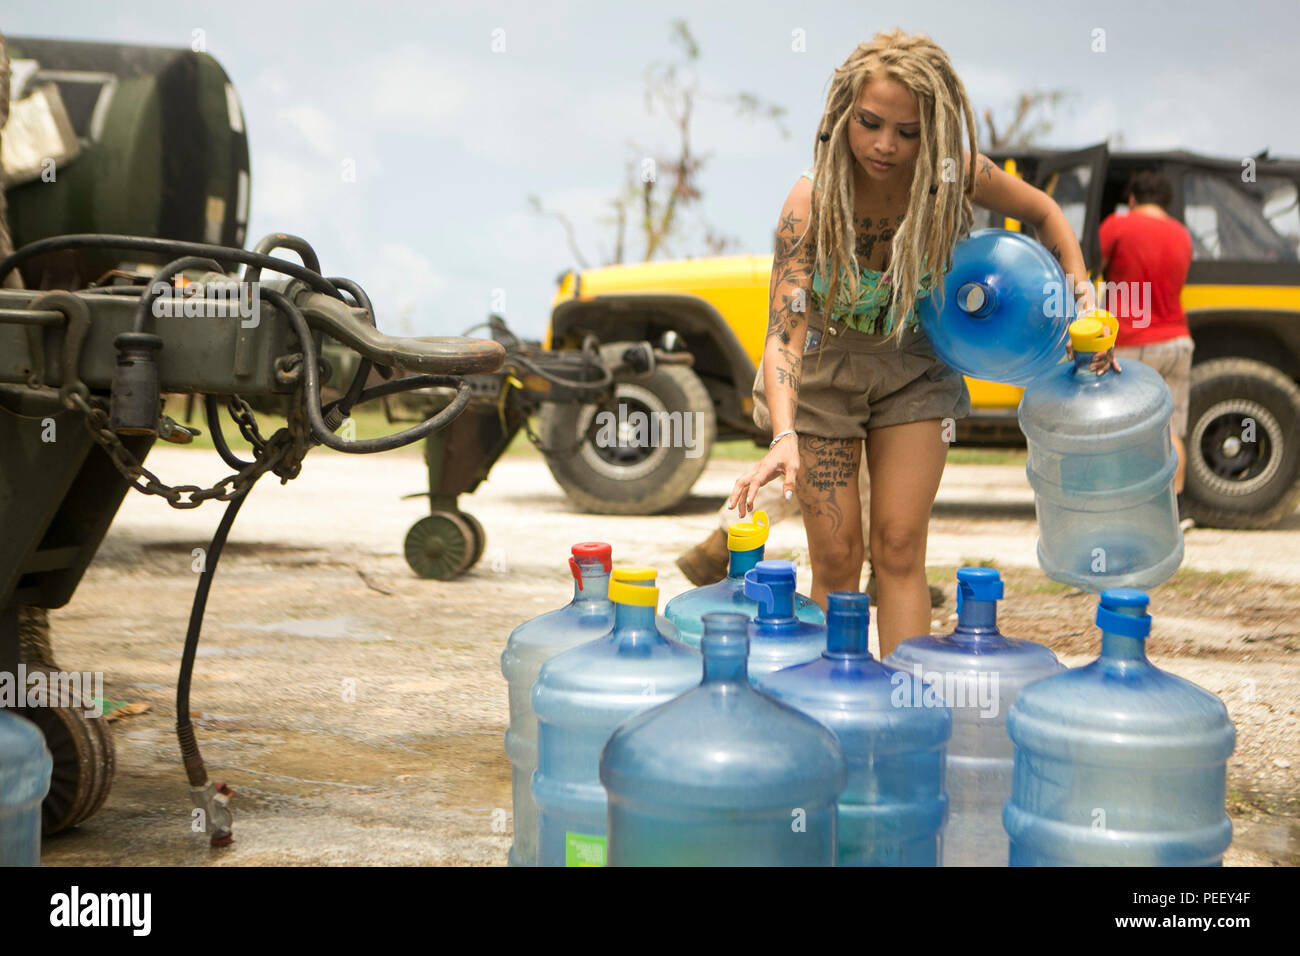 A young woman sets up her water jugs to be filled at a water distribution site set up by U.S. Marines from Combat Logistics Battalion 31, 31st Marine Expeditionary Unit, as part of typhoon relief efforts in Saipan, Aug. 11, 2015. The 31st MEU and the ships of the Bonhomme Richard Amphibious Ready Group are assisting the Federal Emergency Management Agency with distributing emergency relief supplies to Saipan after the island was struck by Typhoon Soudelor Aug. 2-3. (U.S. Marine Corps photo by Lance Cpl. Brian Bekkala/Released) Stock Photo